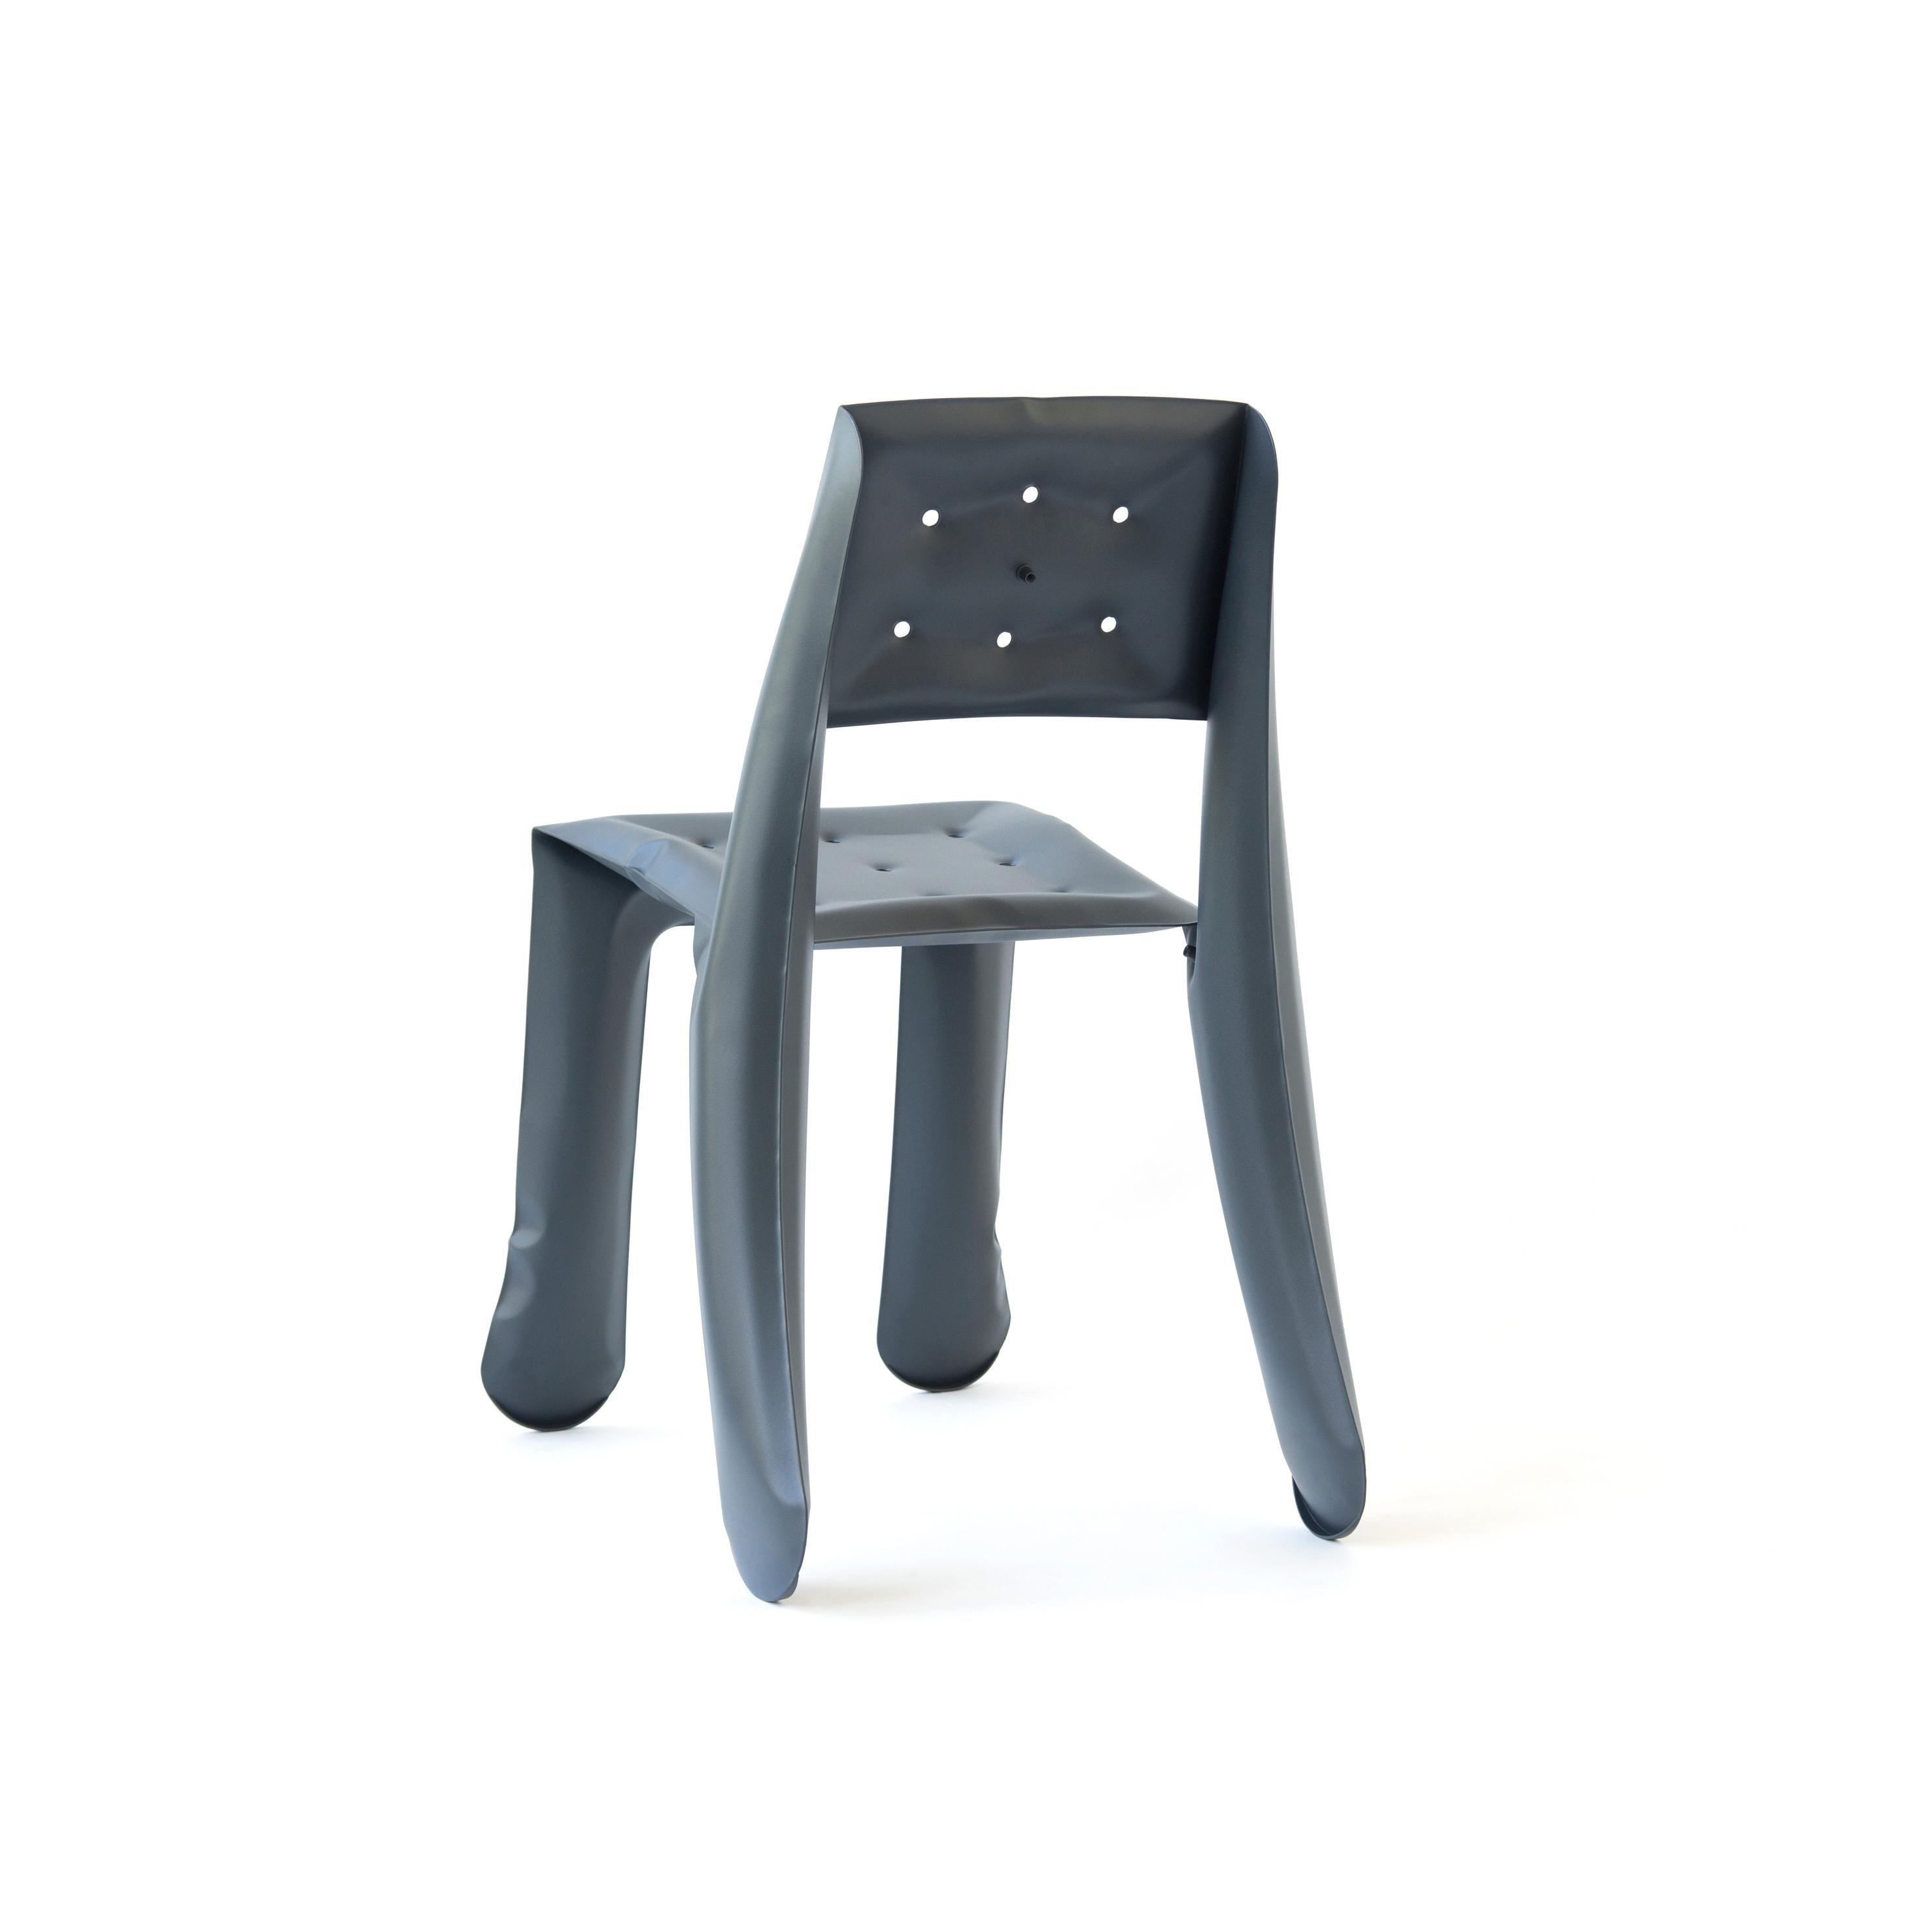 Graphite Carbon Steel Chippensteel 0.5 Sculptural Chair by Zieta In New Condition For Sale In Geneve, CH